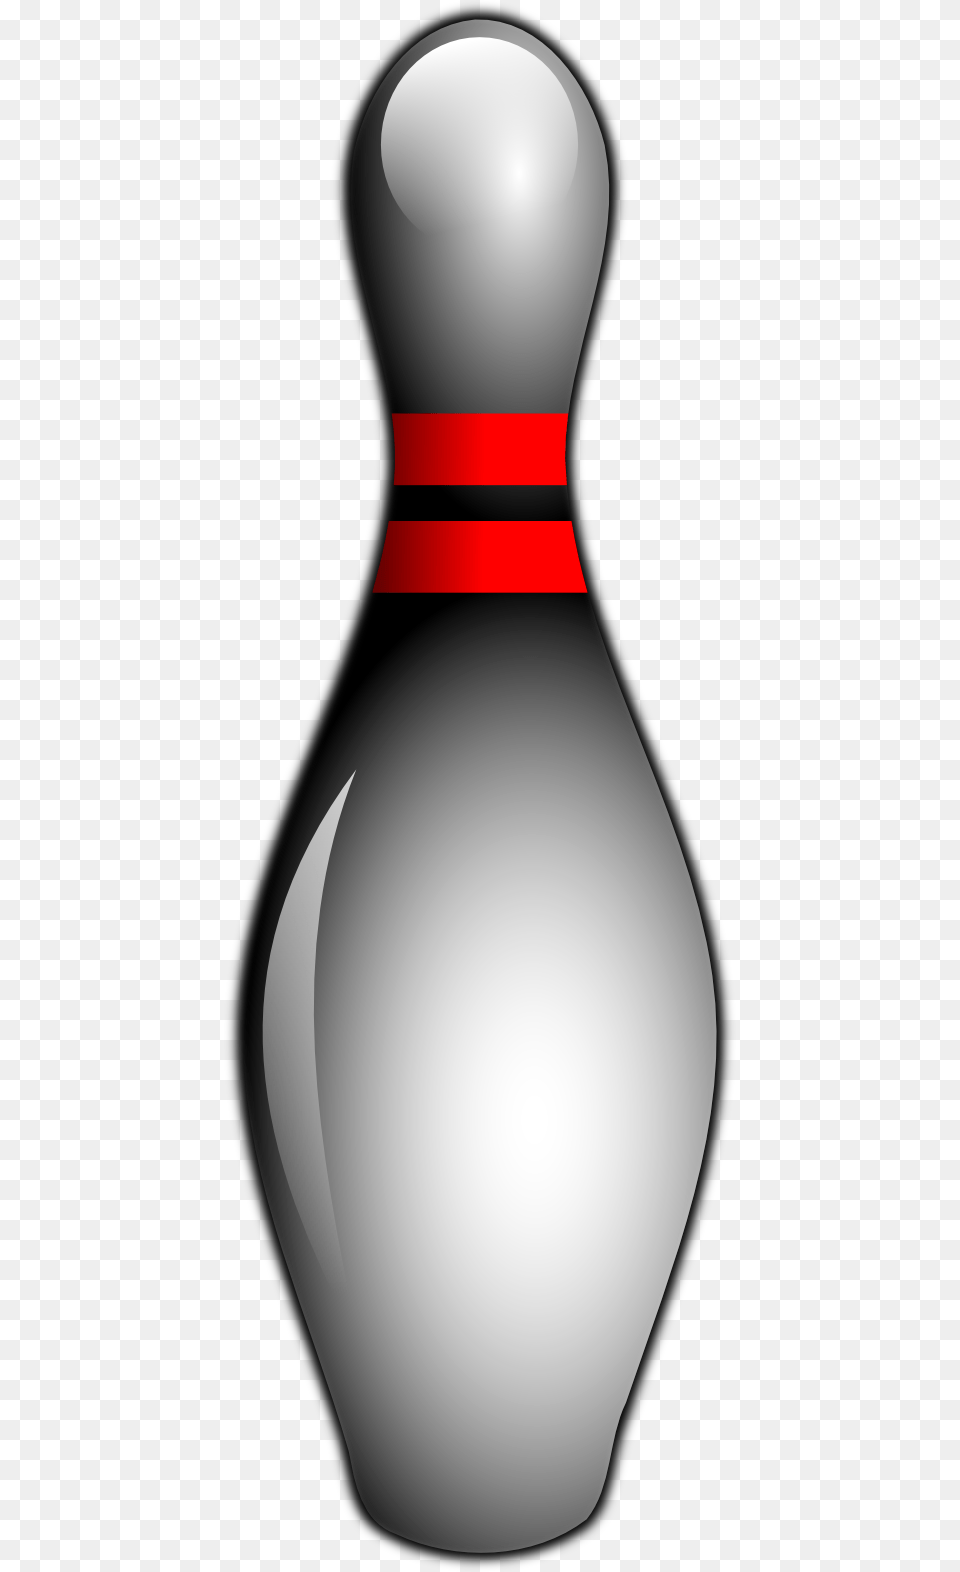 Bowling, Leisure Activities, Ammunition, Grenade Png Image